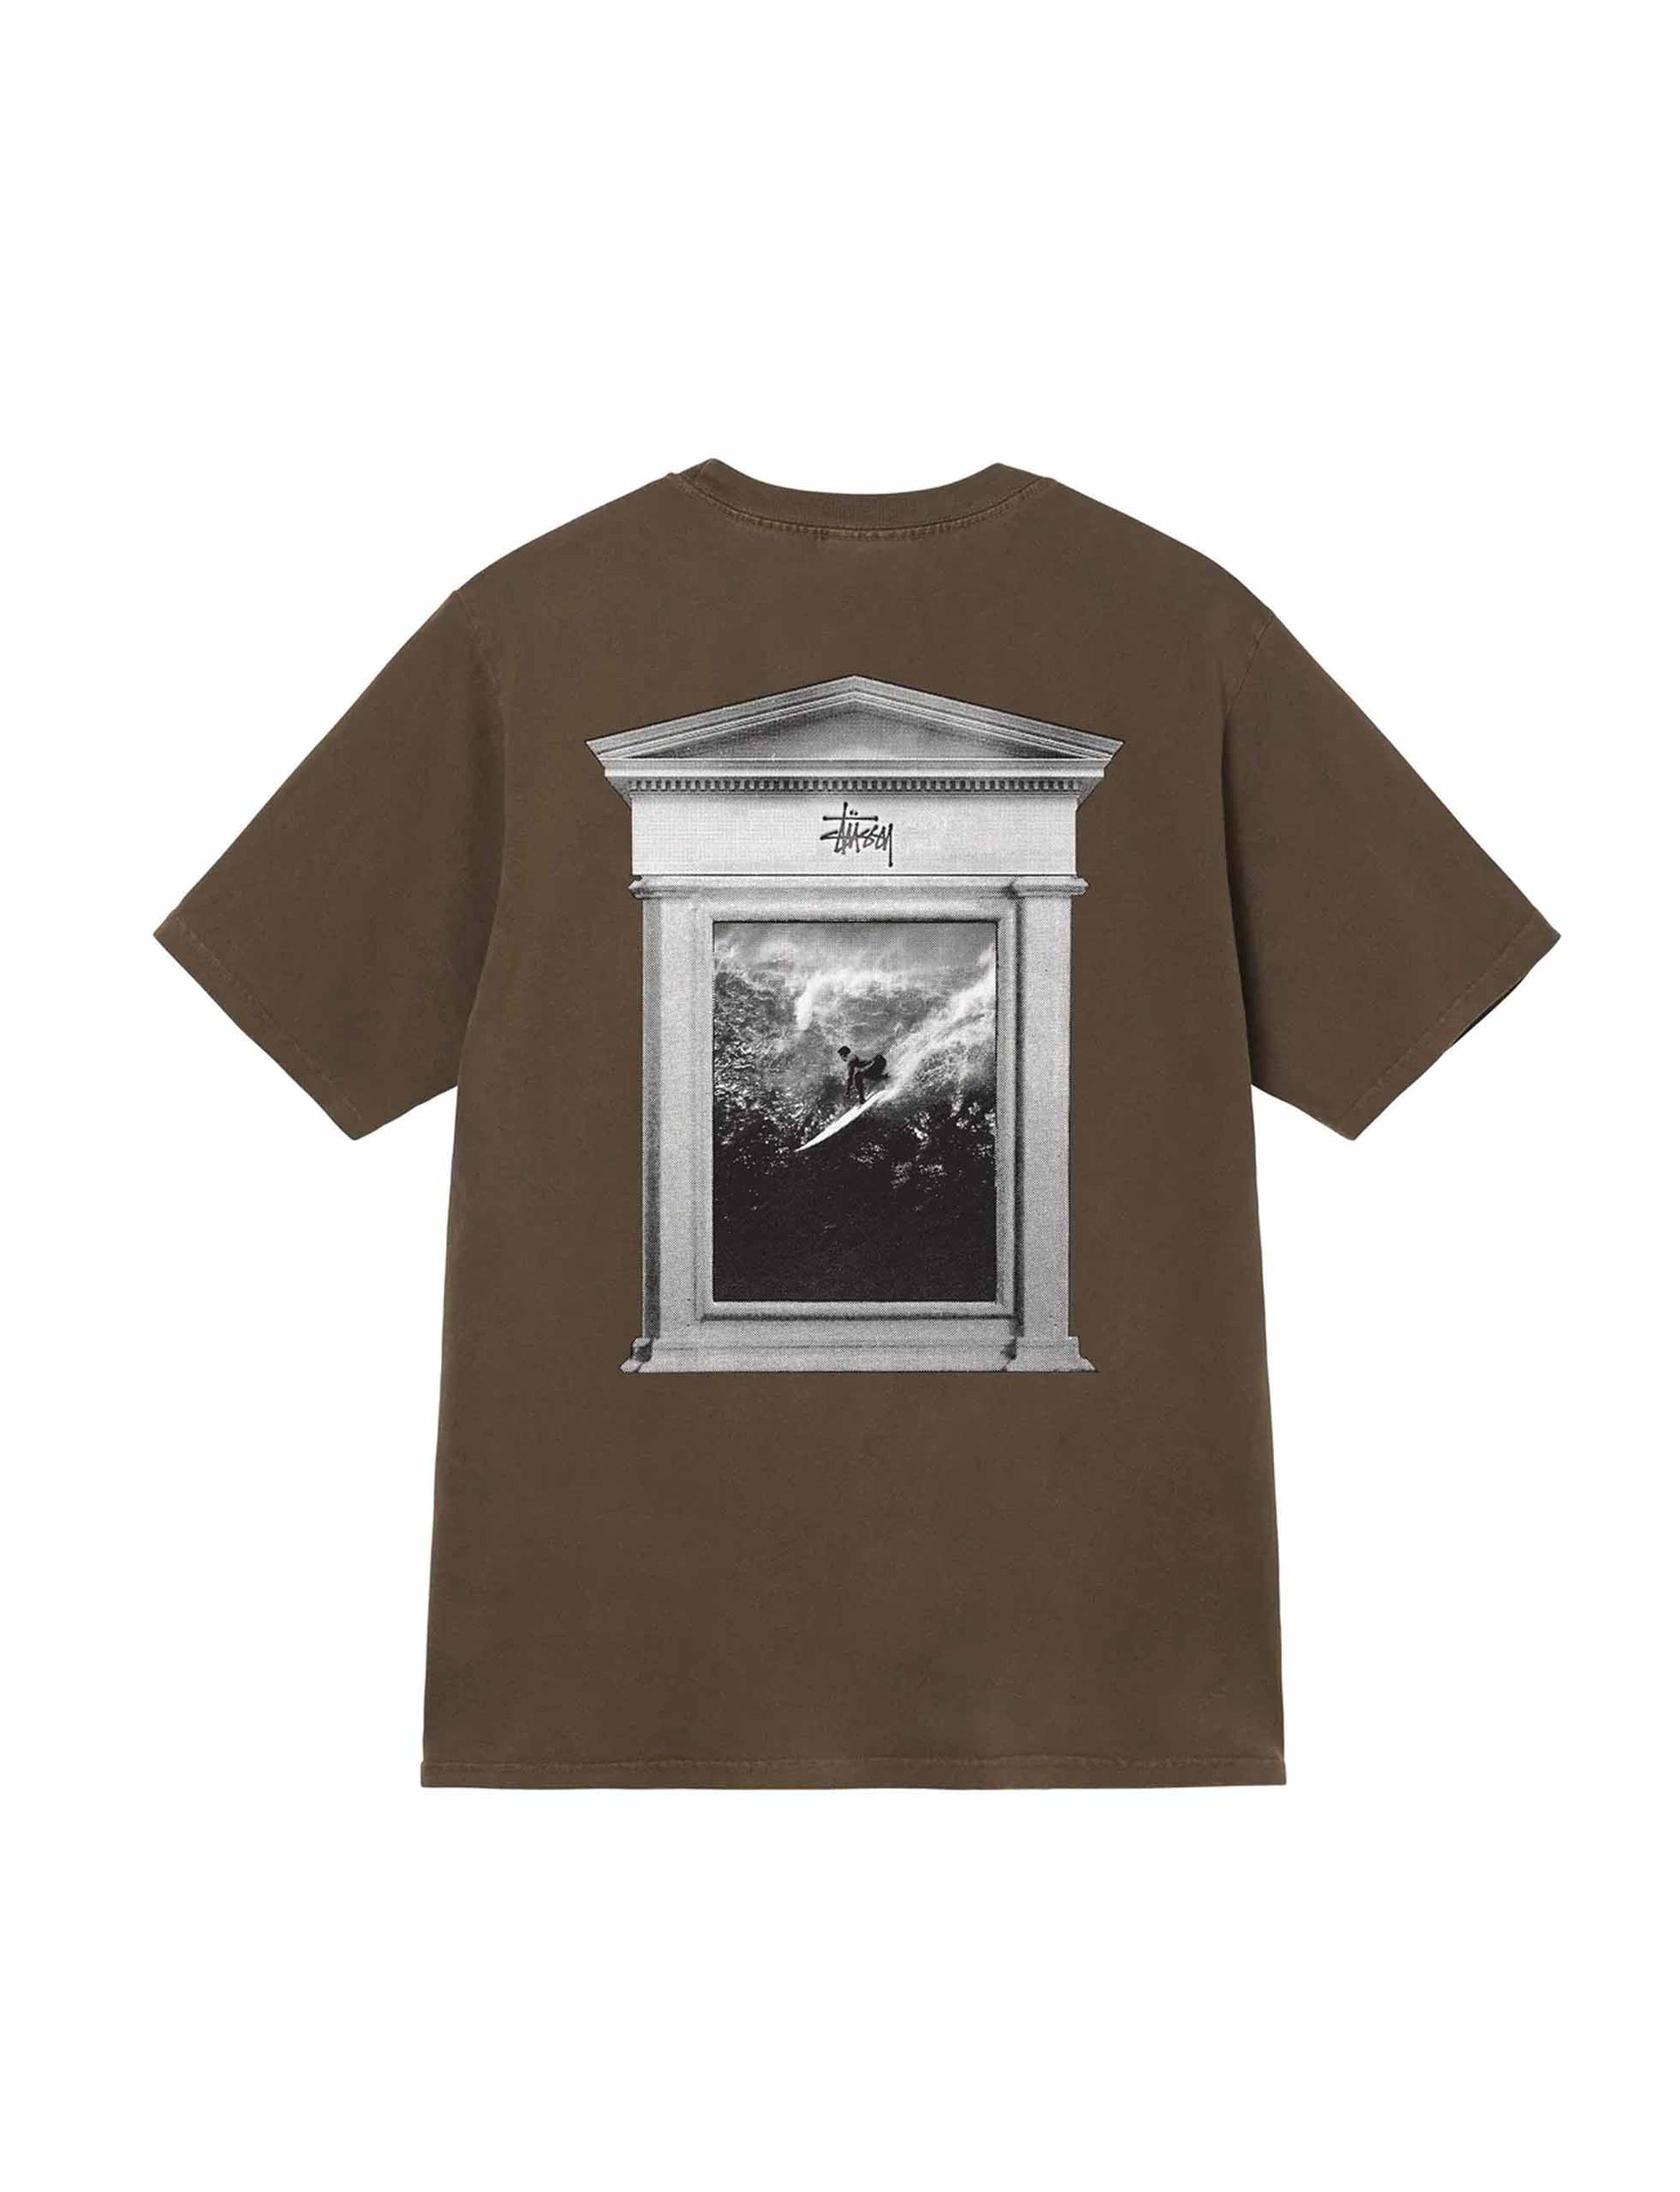 STÜSSY Surf Tomb Pig. Dyed Tee COFFEE